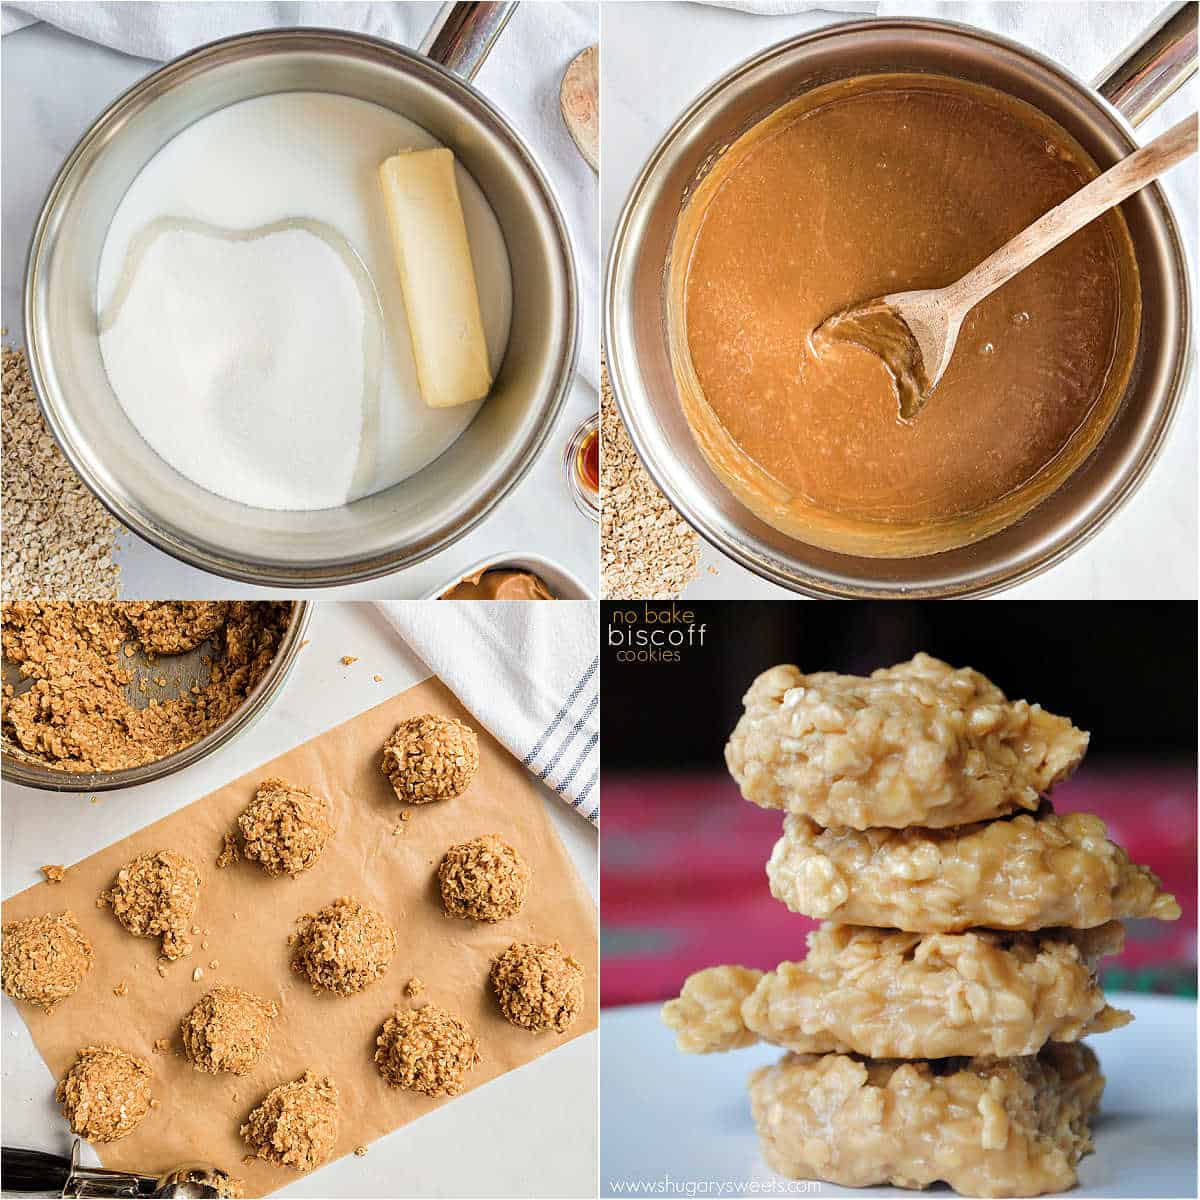 Step by step photos showing how to make no bake biscoff cookies.